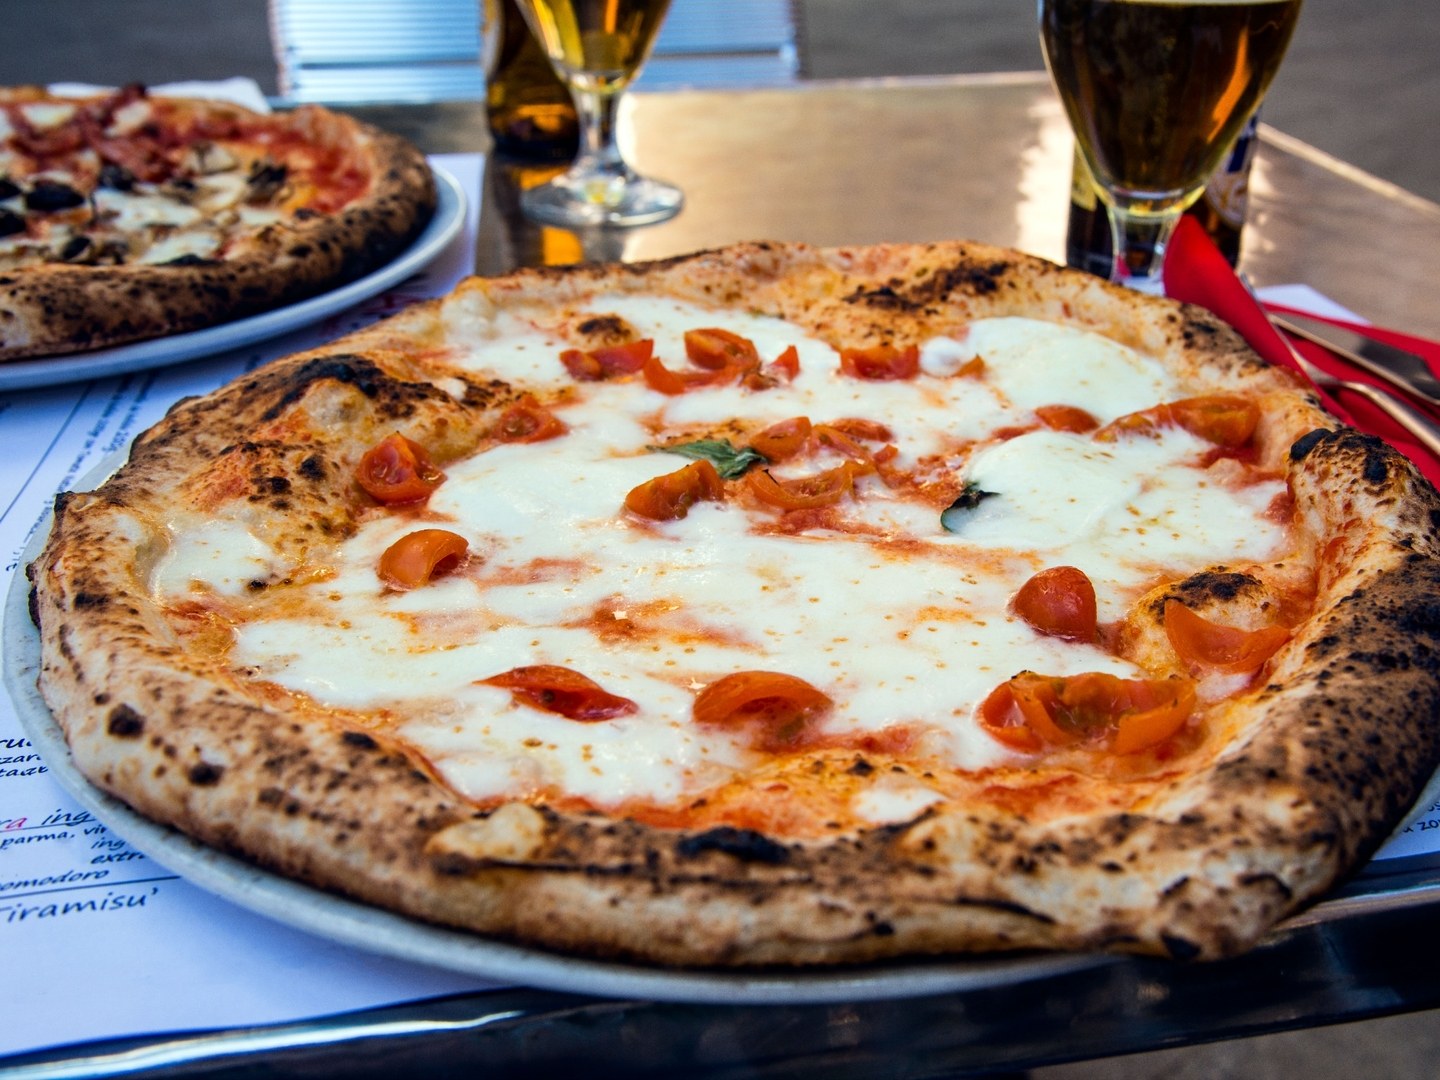 Where to eat the best pizza in Rome